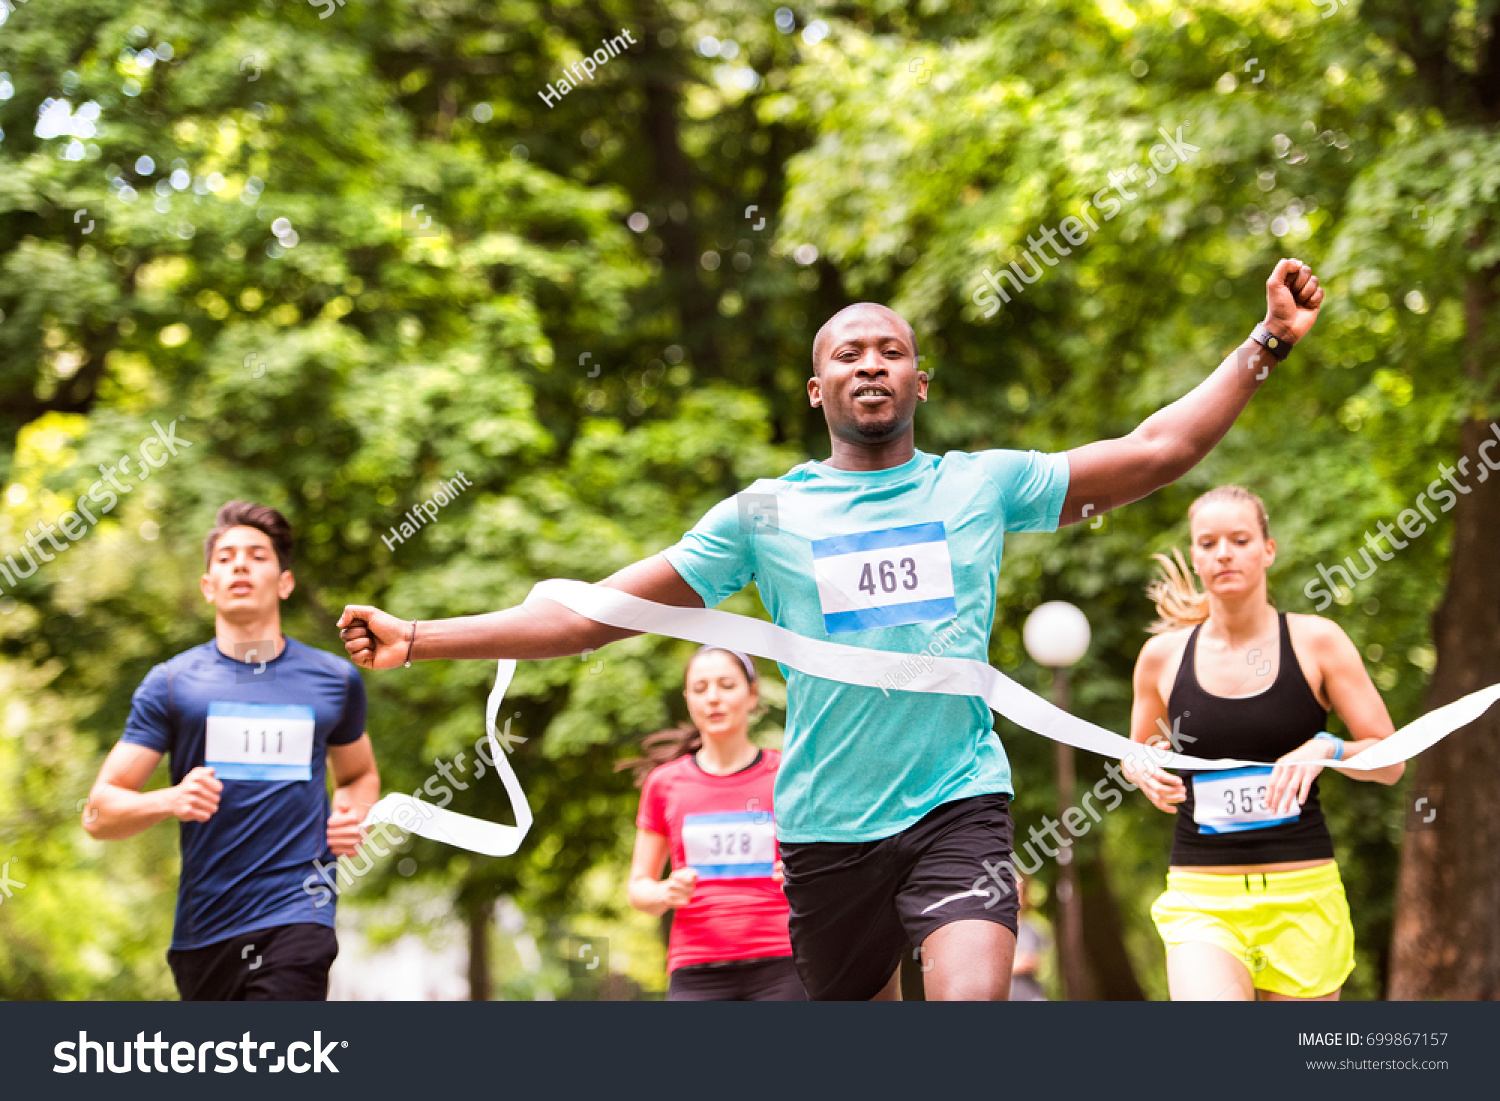 Young man running in the crowd crossing the finish line. #699867157